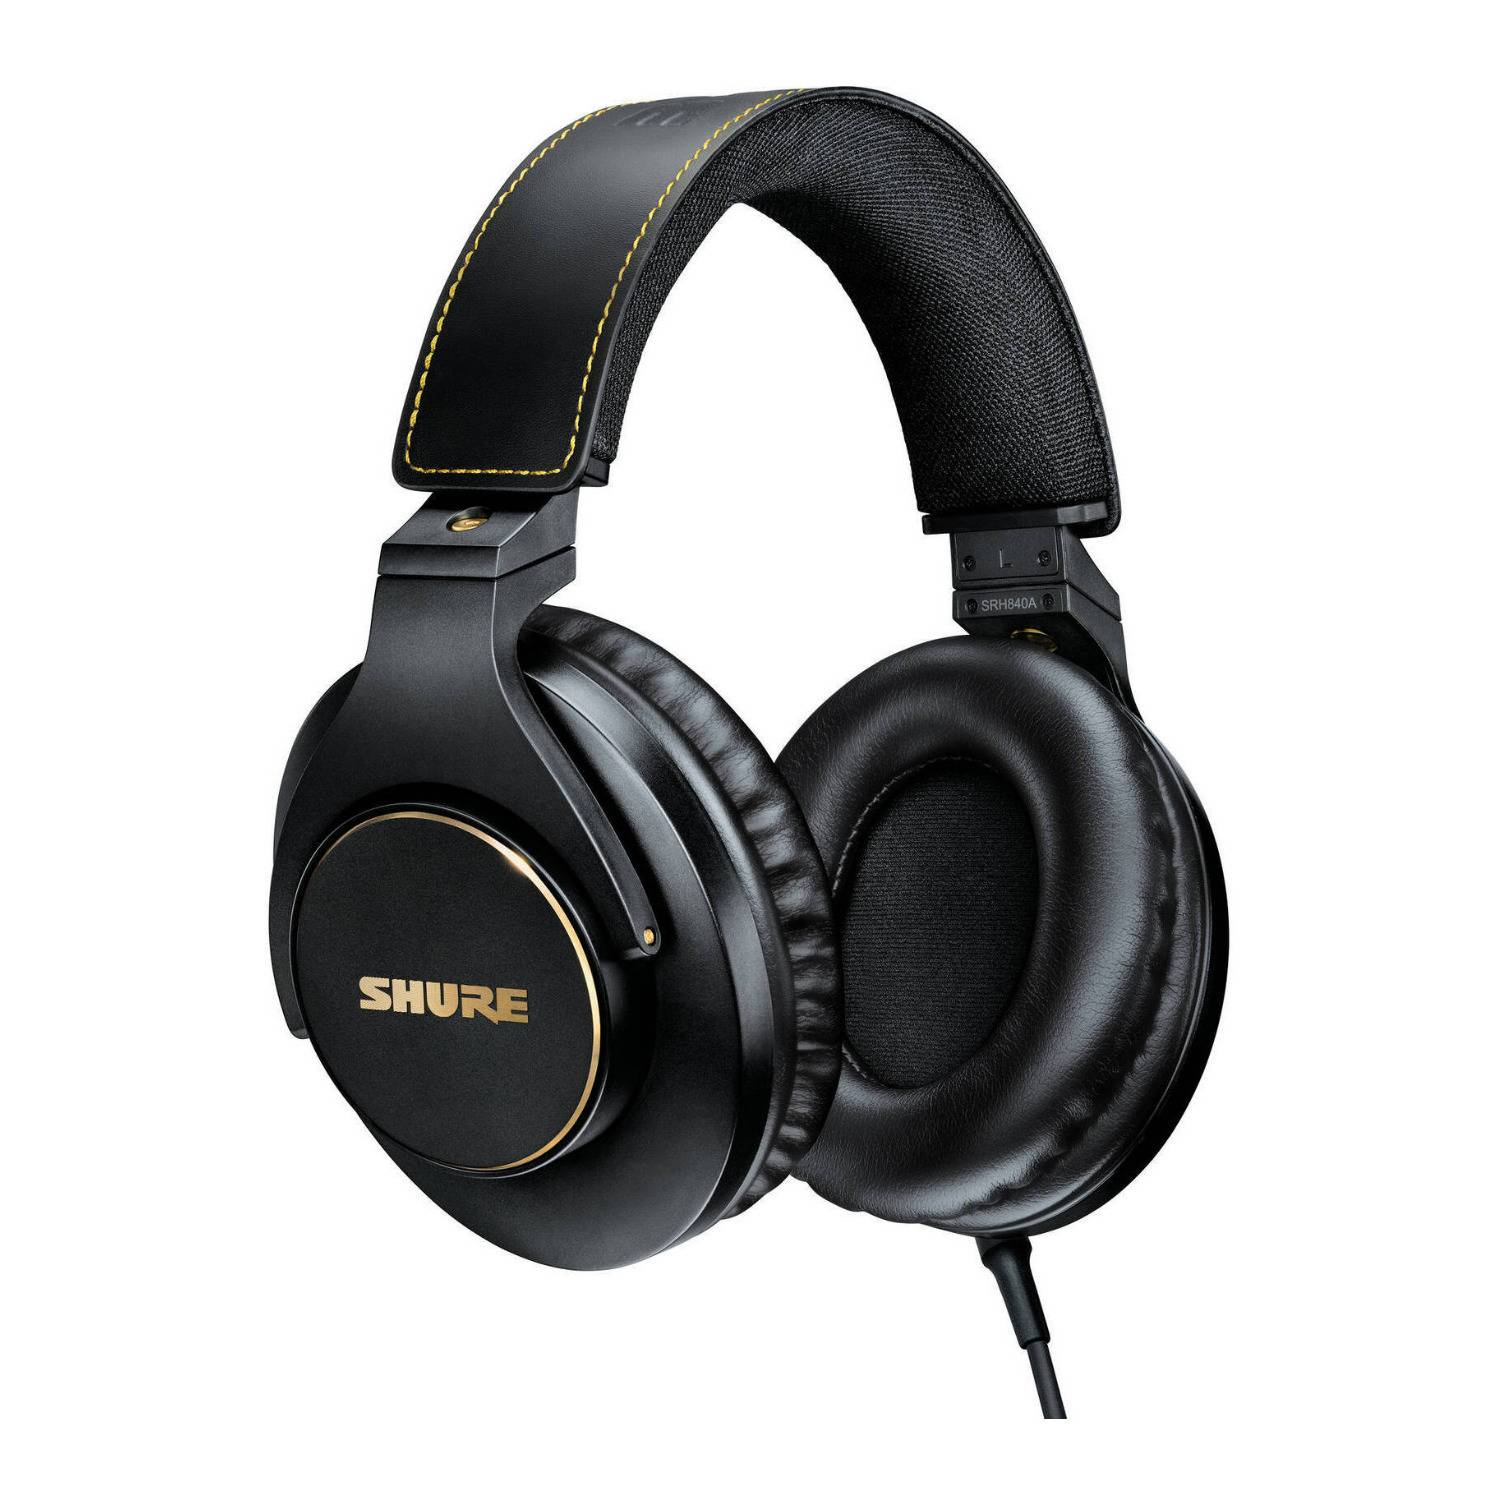 Shure Professional Studio Monitoring Headphones with Padded Headband and 40mm Dynamic Drivers